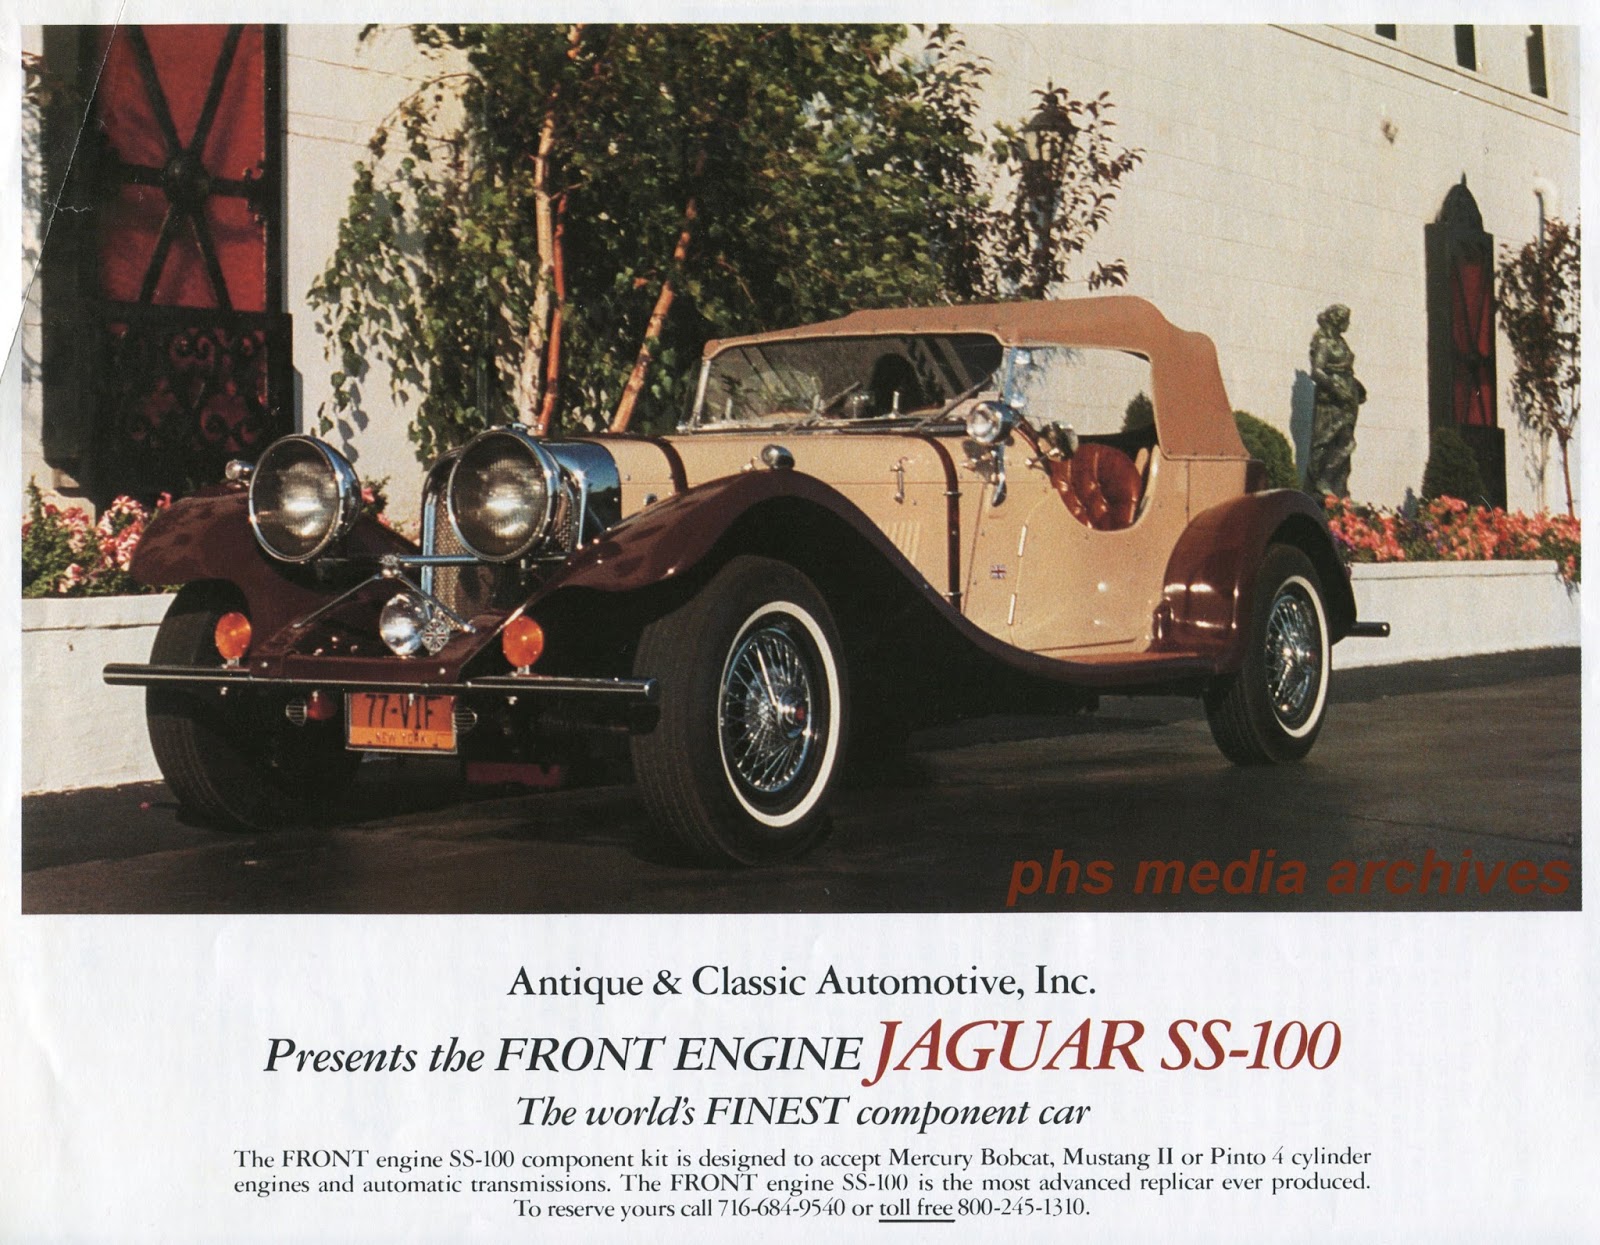 315Good Jaguar ss100 antique collectibles cars of buffalo ny for Touring